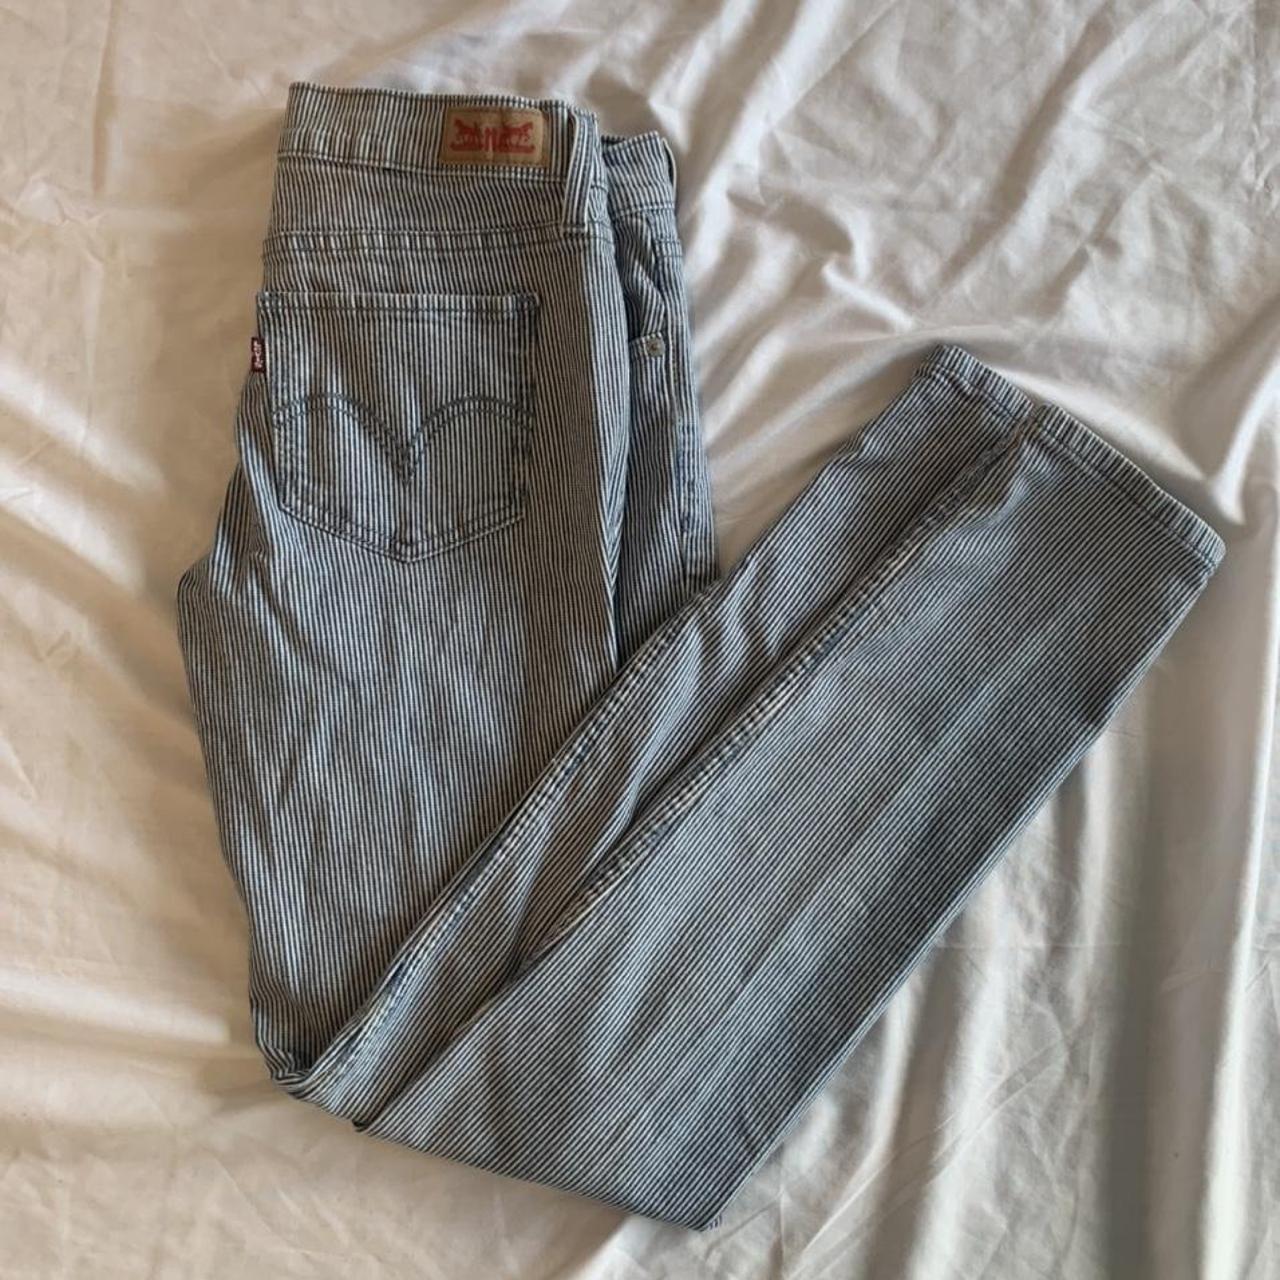 Levi's Women's White and Blue Jeans | Depop